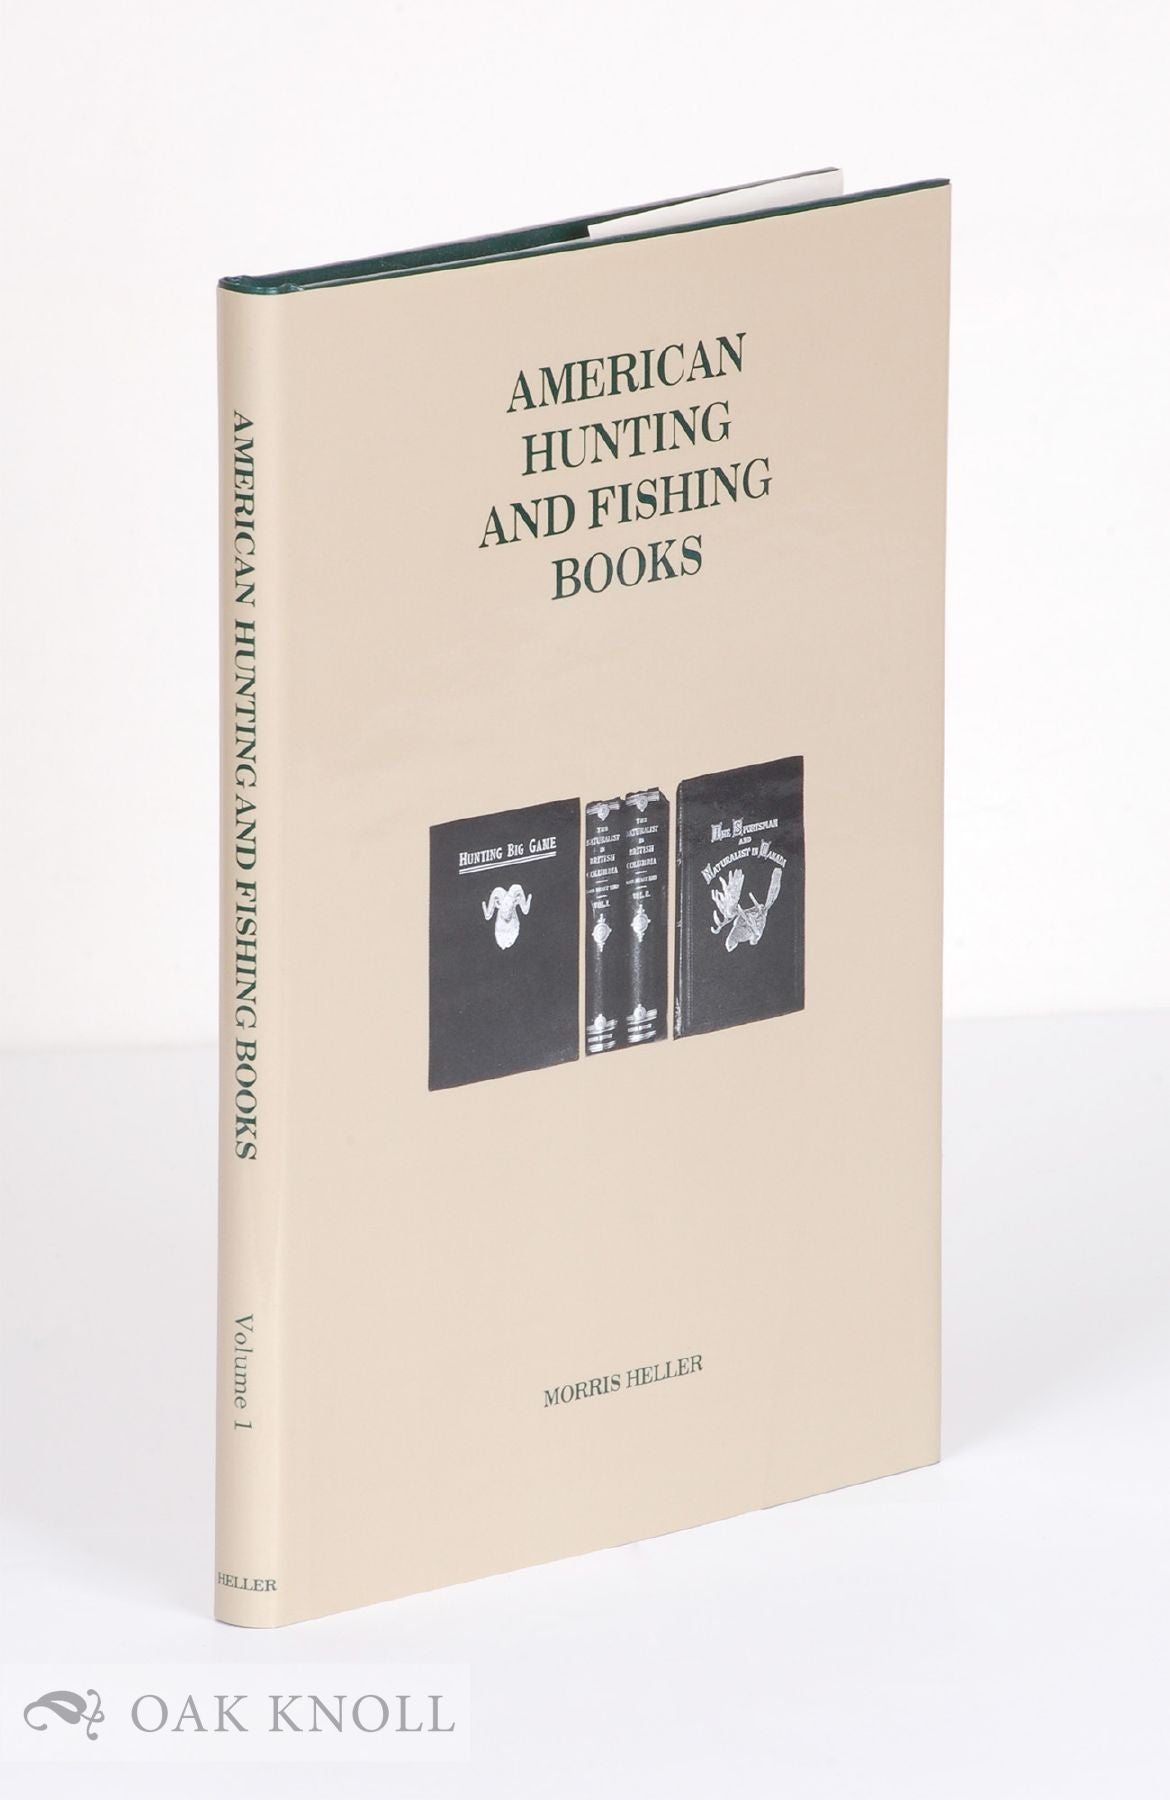 AMERICAN HUNTING AND FISHING BOOKS by Morris Heller on Oak Knoll